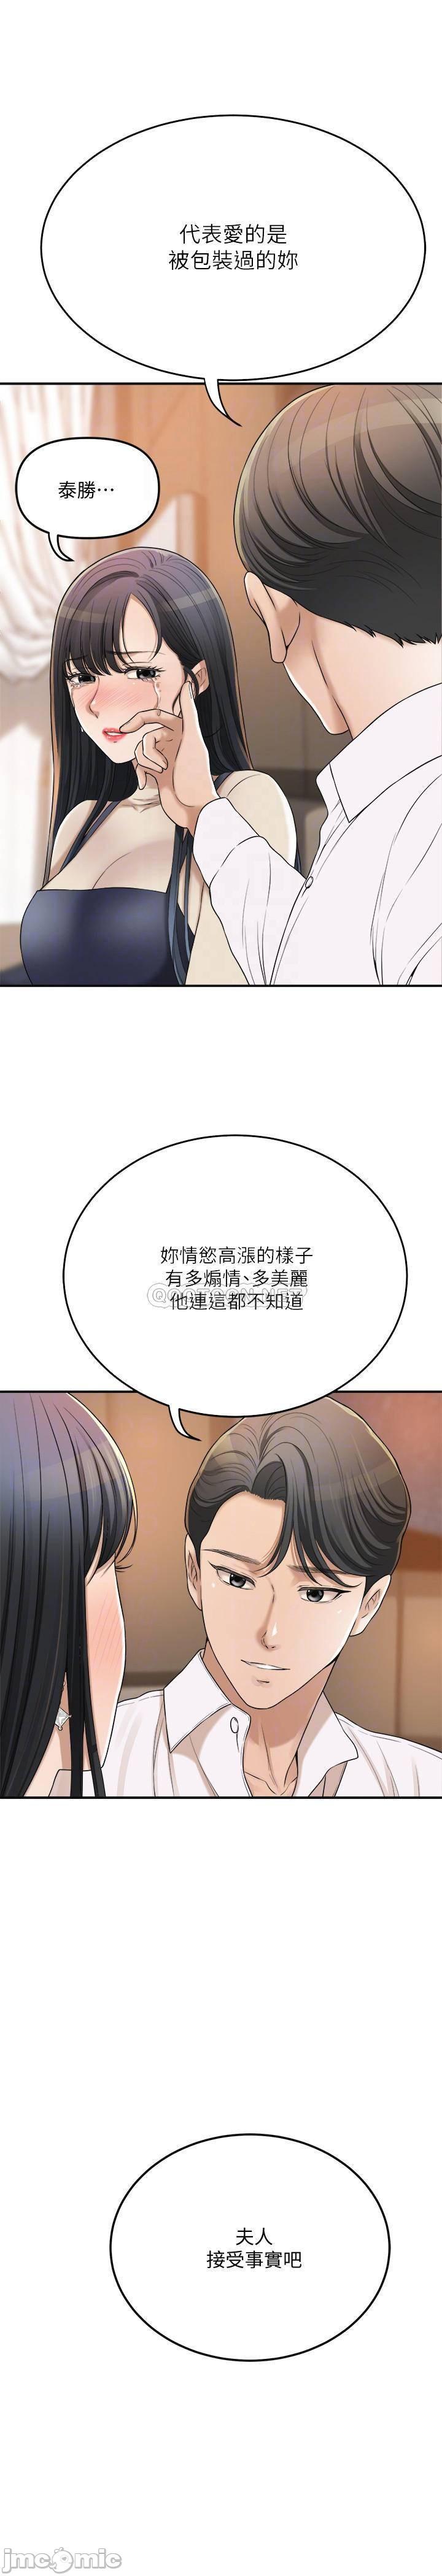 Oiled 抑欲人妻41-50（完结） Hymen - Page 8